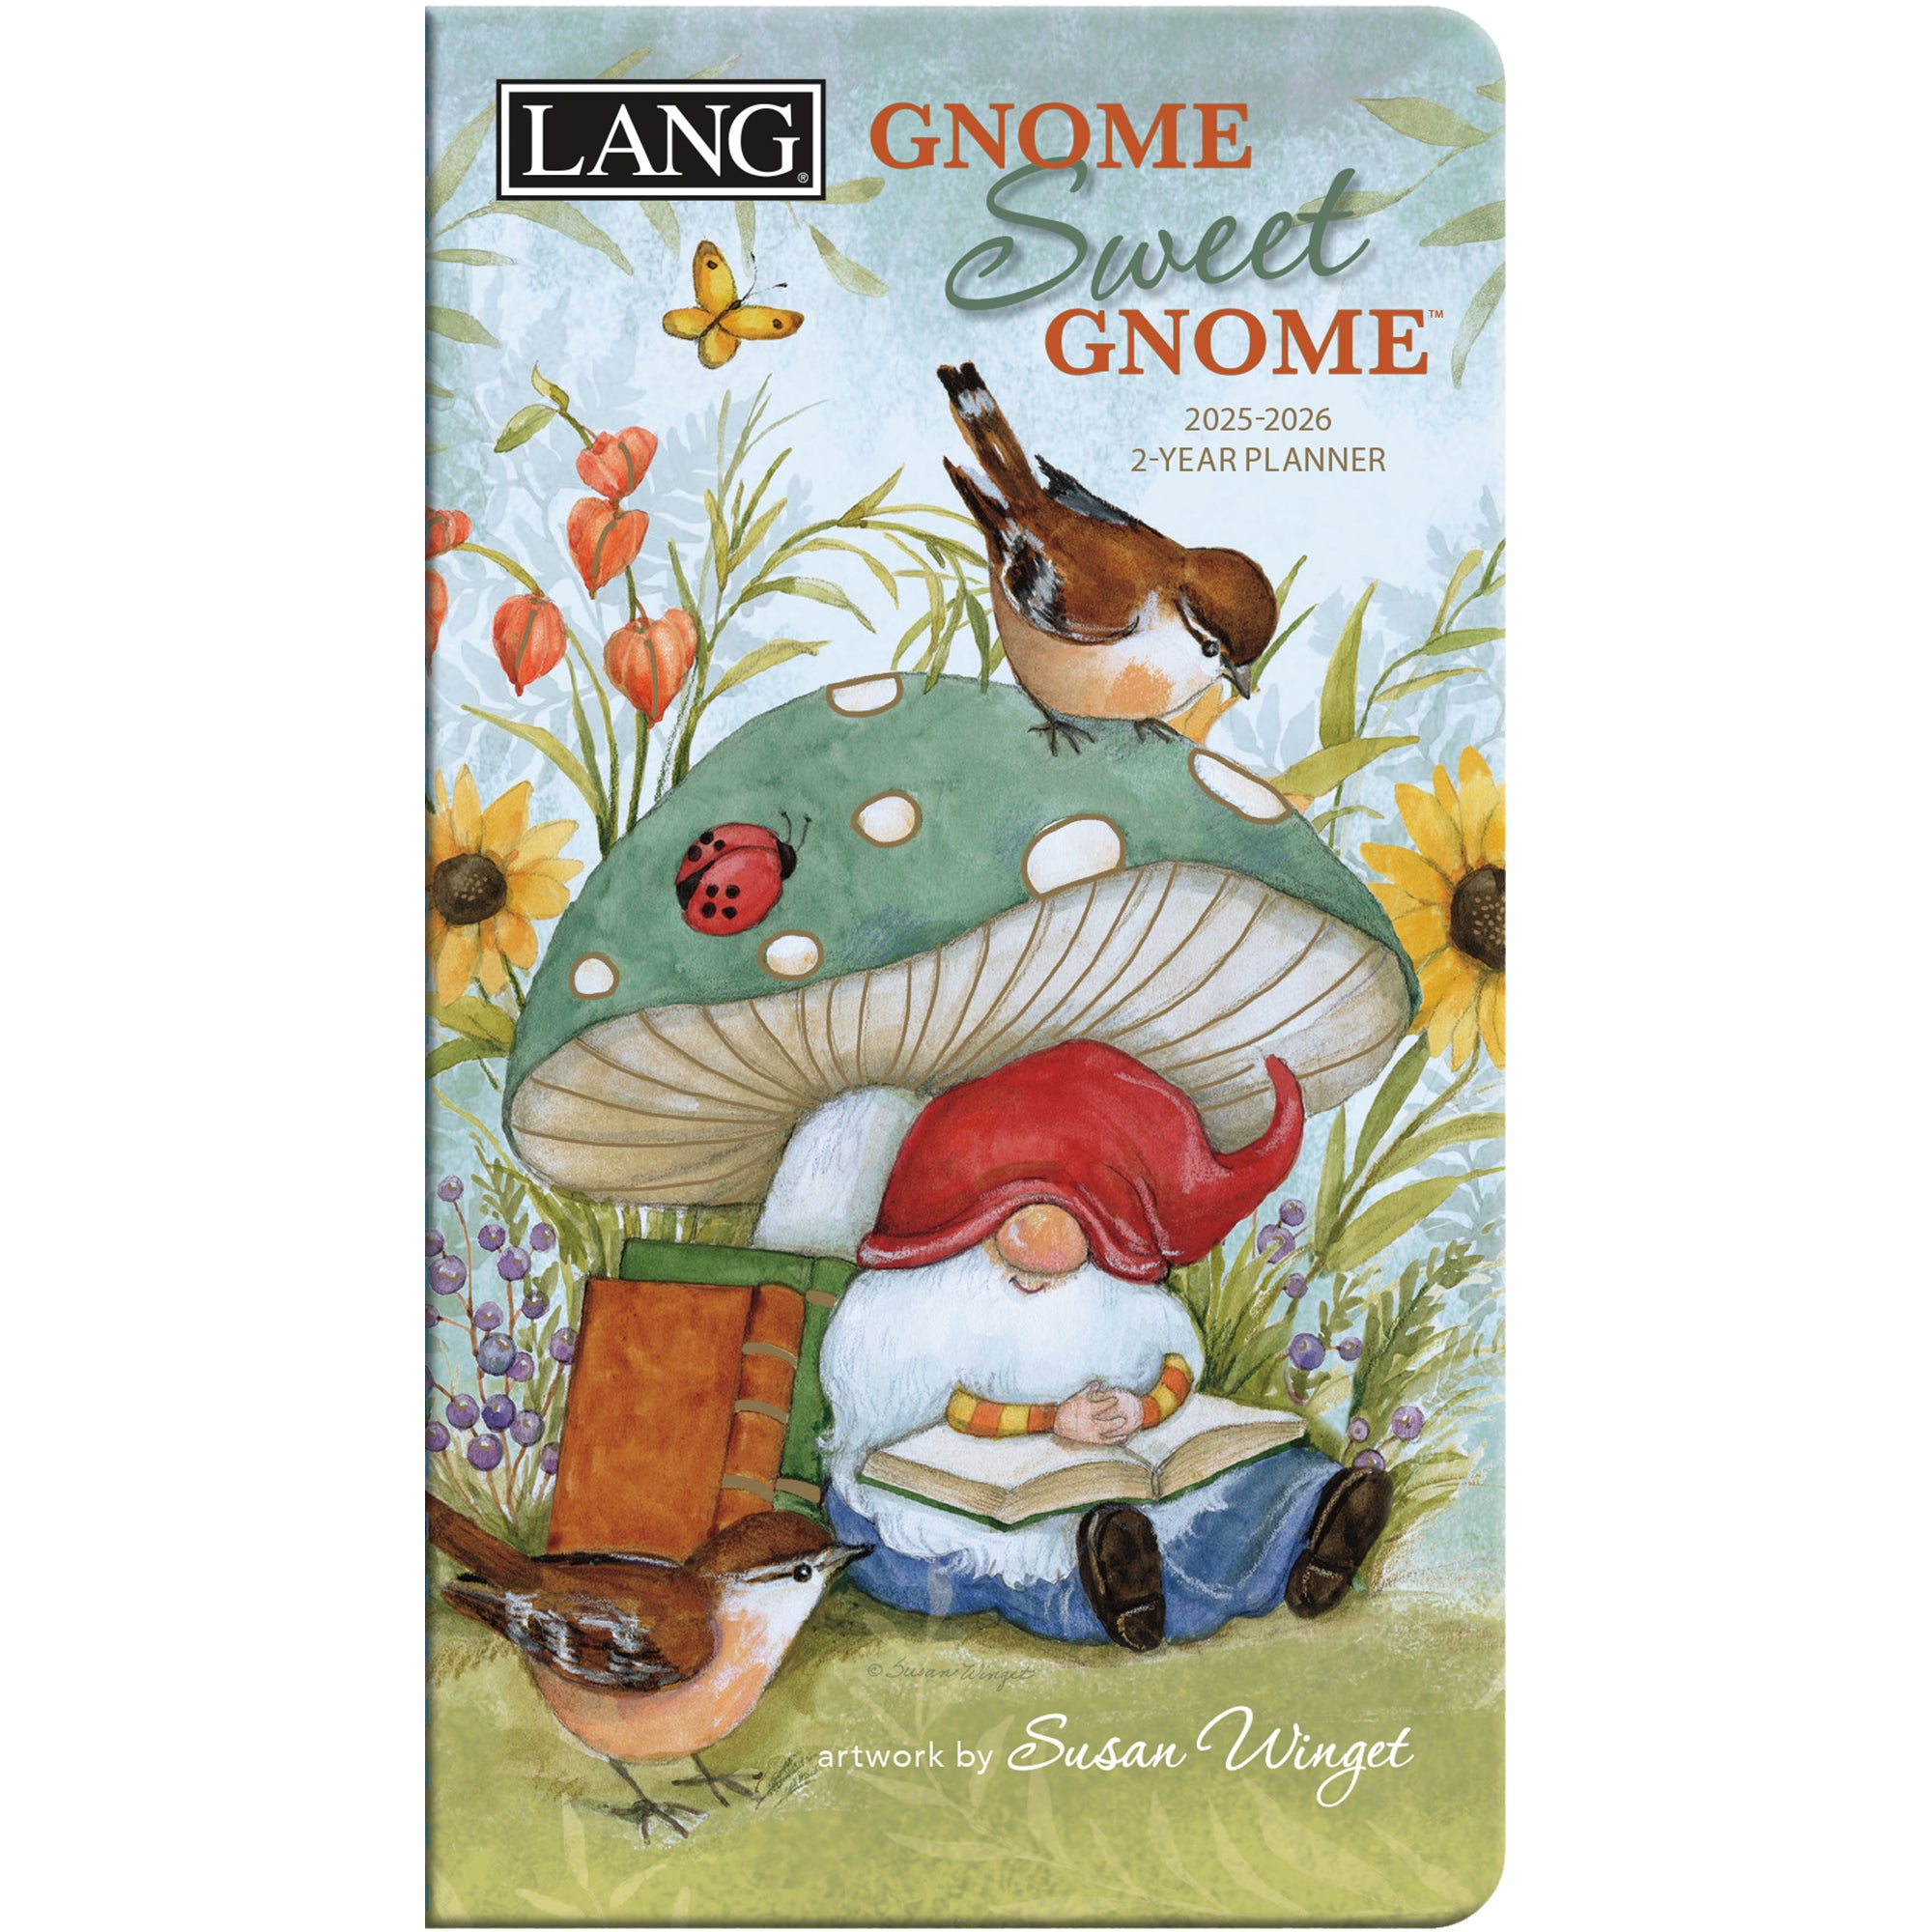 2025-2026 Gnome Sweet Gnome - LANG 2 Year Pocket Diary/Planner